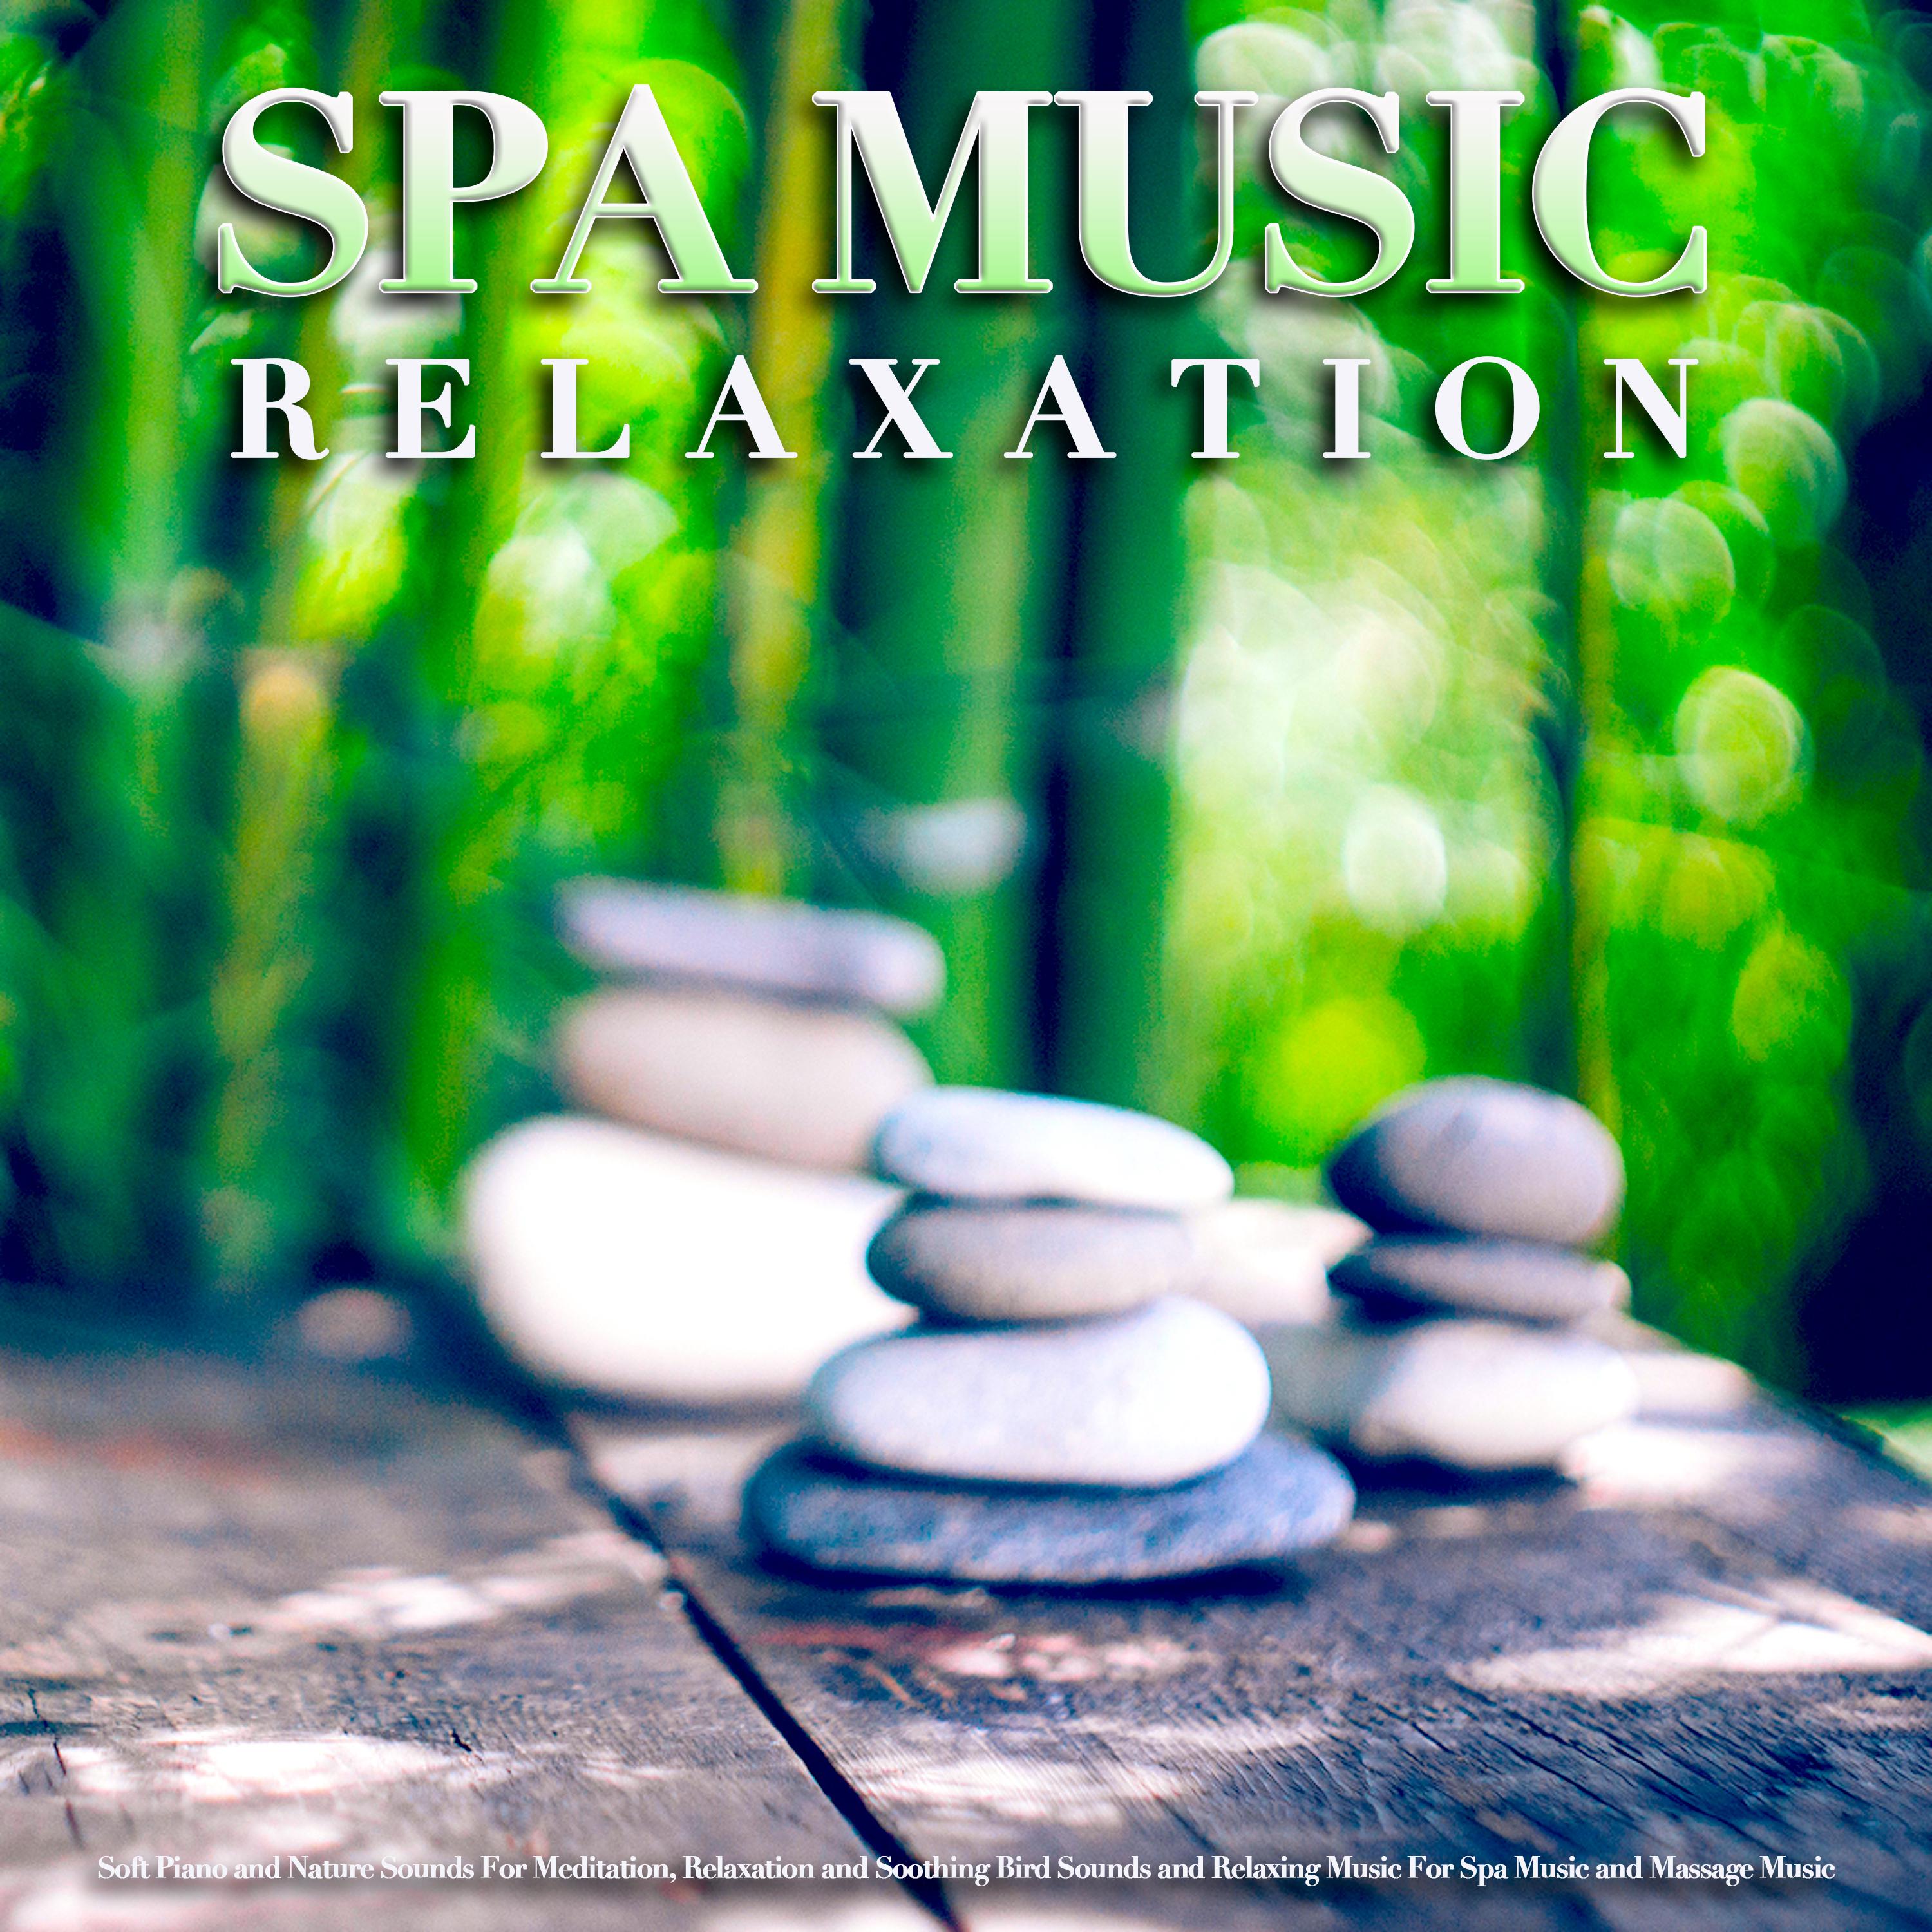 Spa Music Relaxation: Soft Piano and Nature Sounds For Meditation, Relaxation and Soothing Bird Sounds and Relaxing Music For Spa Music and Massage Music